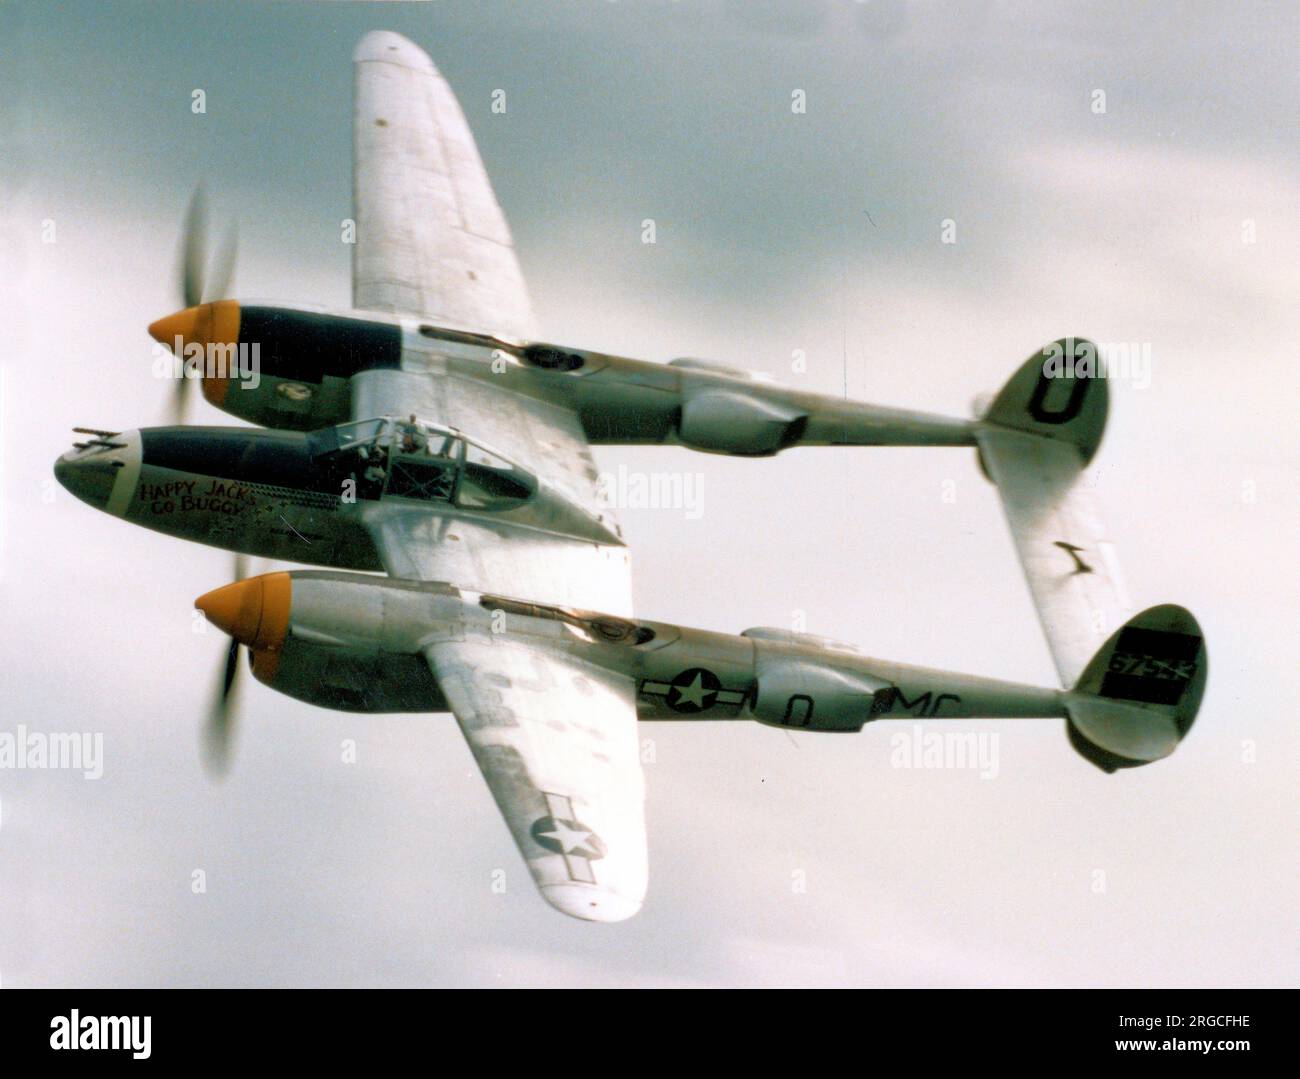 Lockheed P-38J Lightning N3145X (msn 2054, ex 42-67543), of the Fighter Collection. This aircraft crashed at Duxford on 14 Jul 1996, killing the pilot. Stock Photo